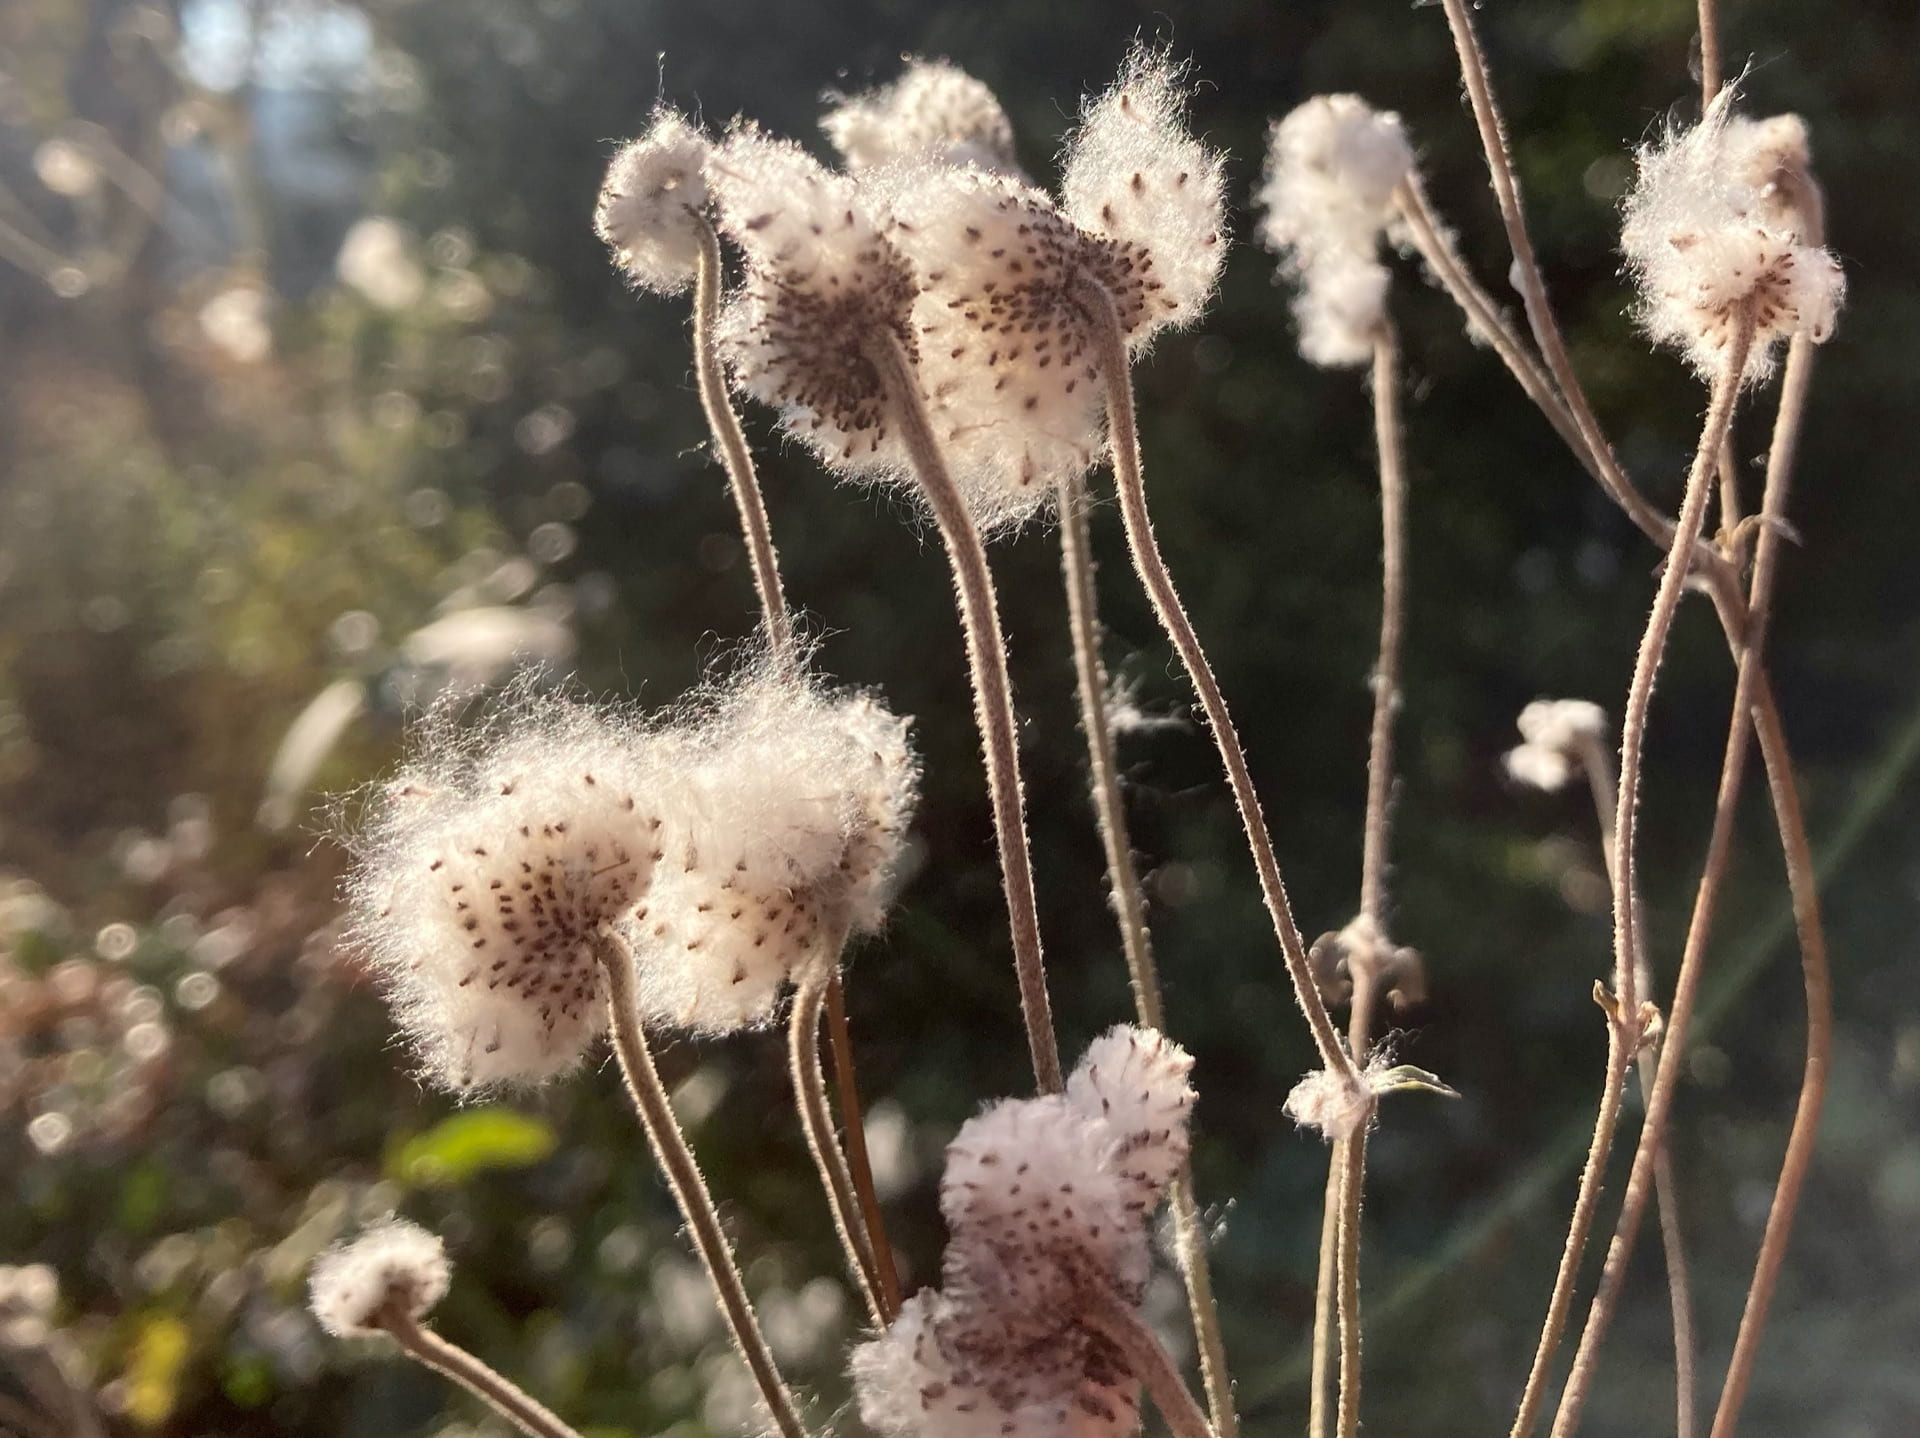 The cotton-like seed heads of Japanese anemones, Eriocapitella hupehensis, catch light from the winter sun.